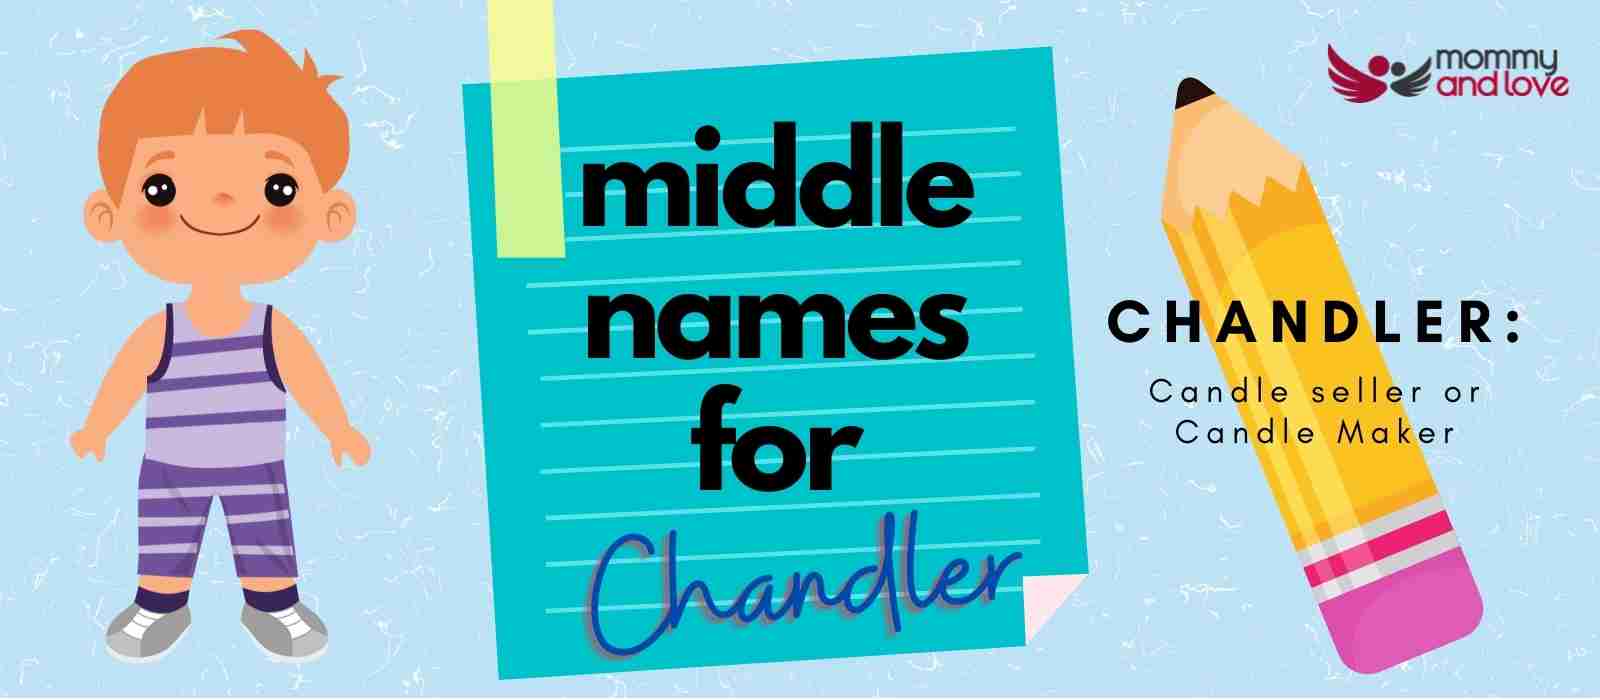 Middle Names for Chandler